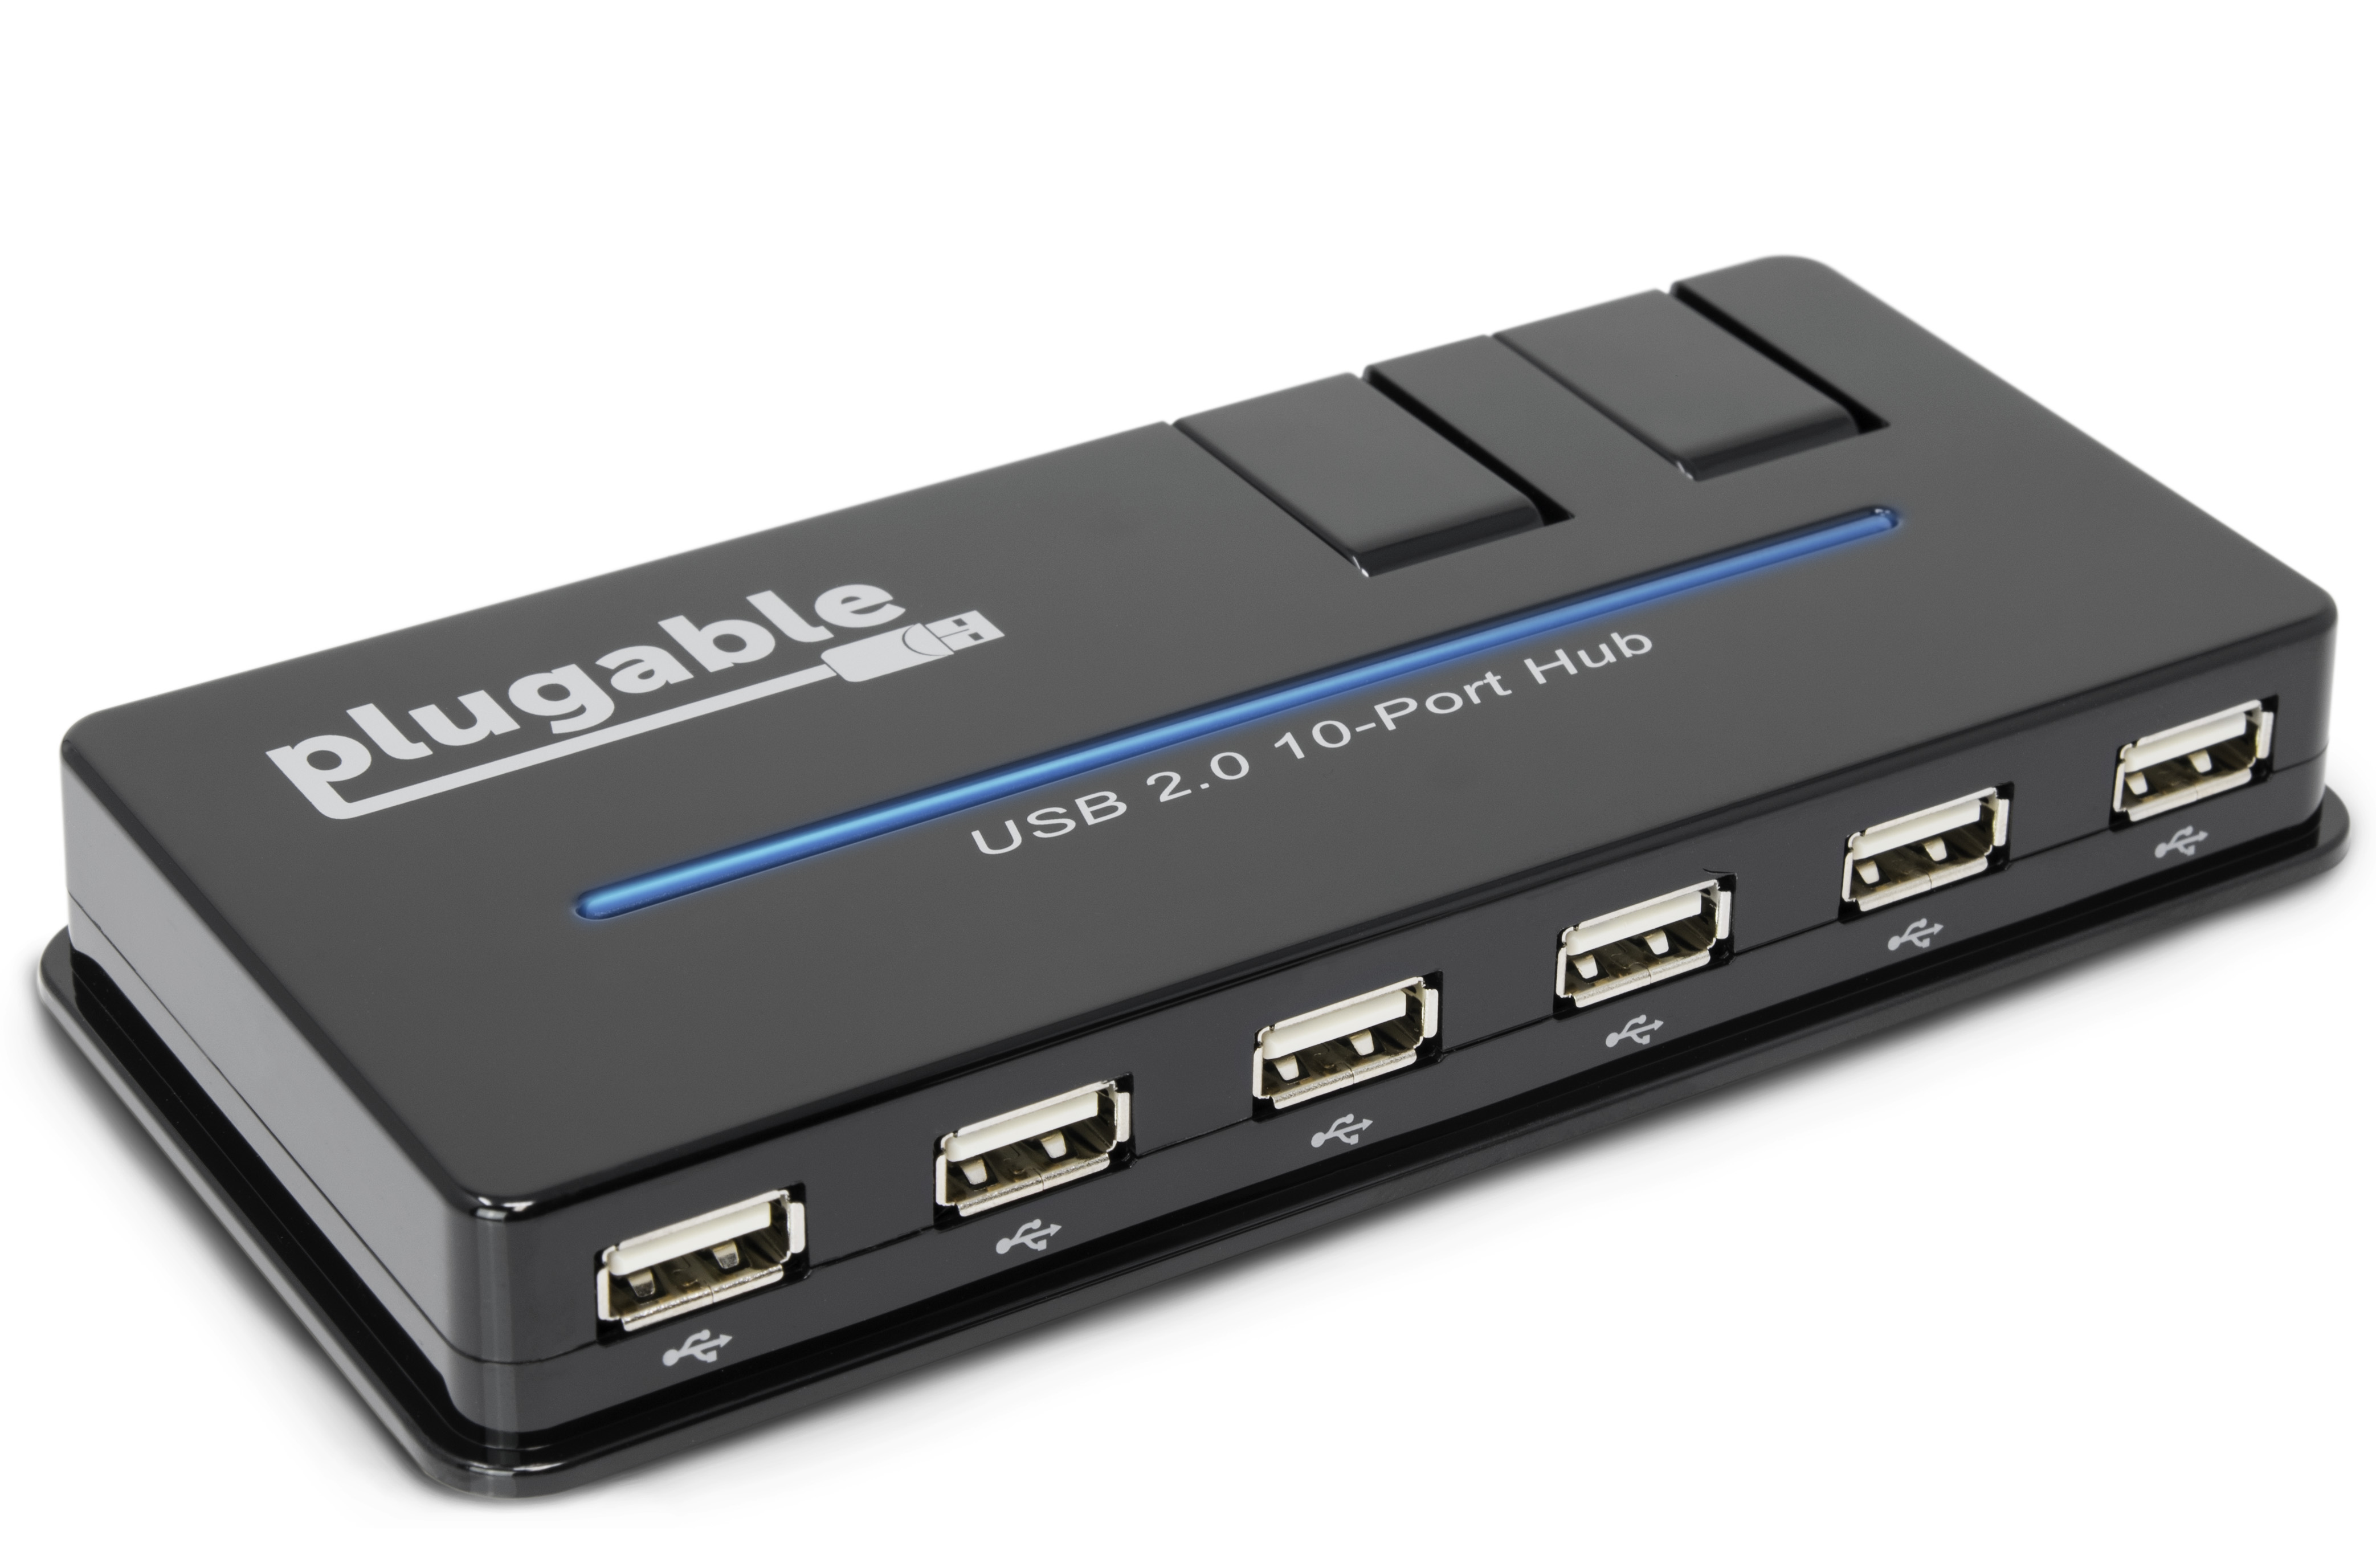 Plugable USB Hub, 10 Port - USB 2.0 with 20W Power Adapter and Two Flip-Up Ports - image 3 of 6